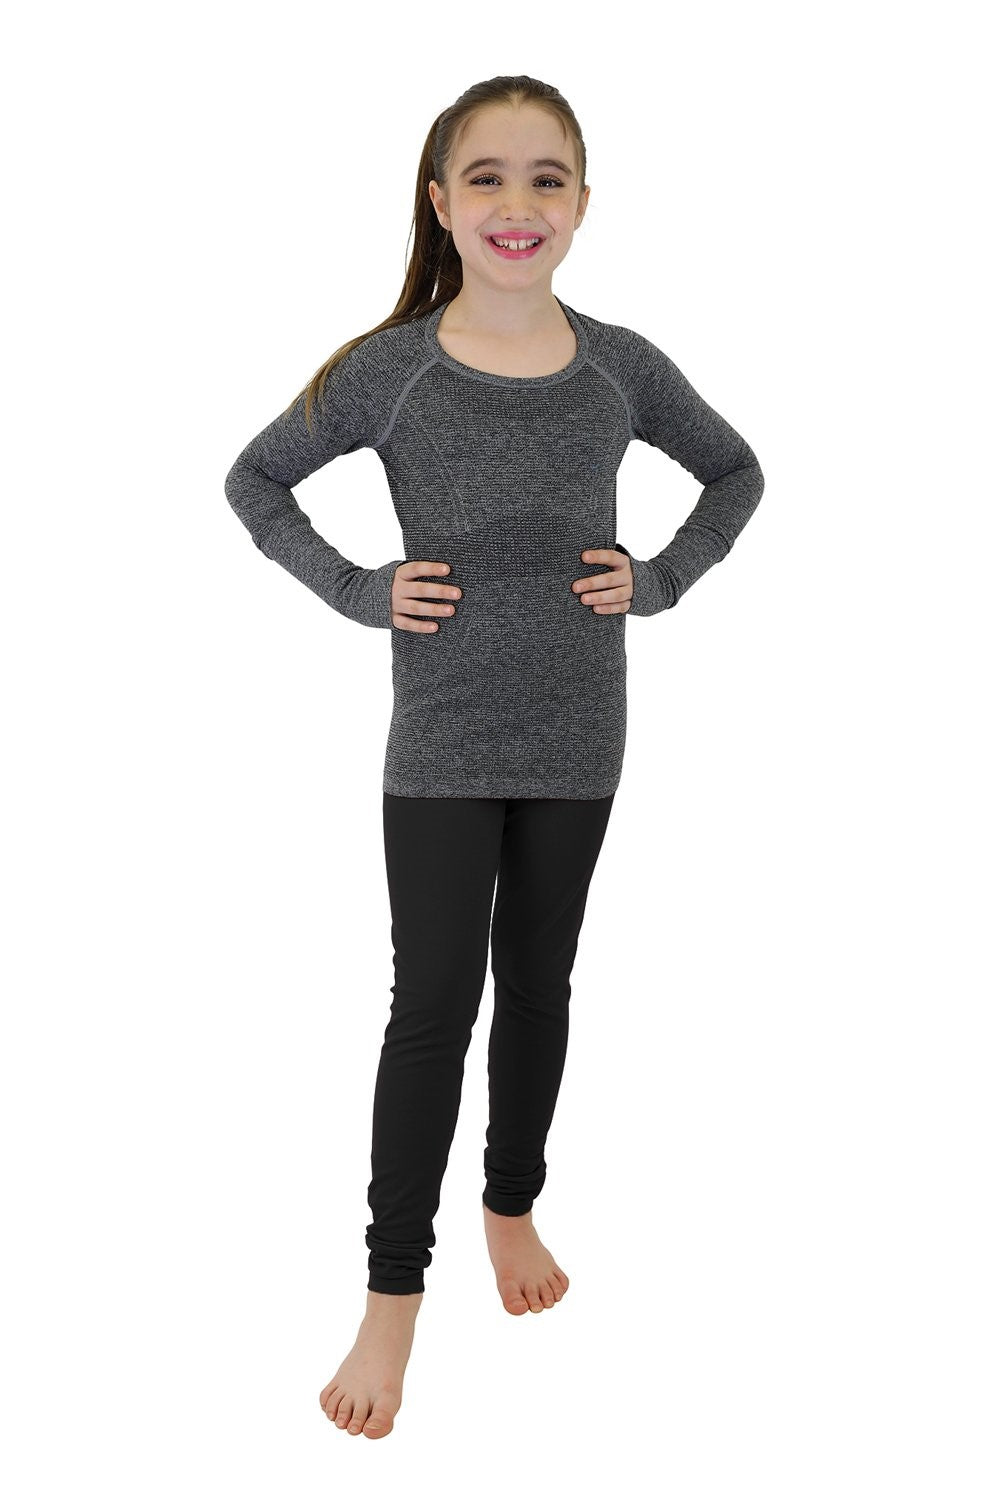 90Degree-Leggings with Pockets/Youth – Soul to Sole Dancewear, LLC